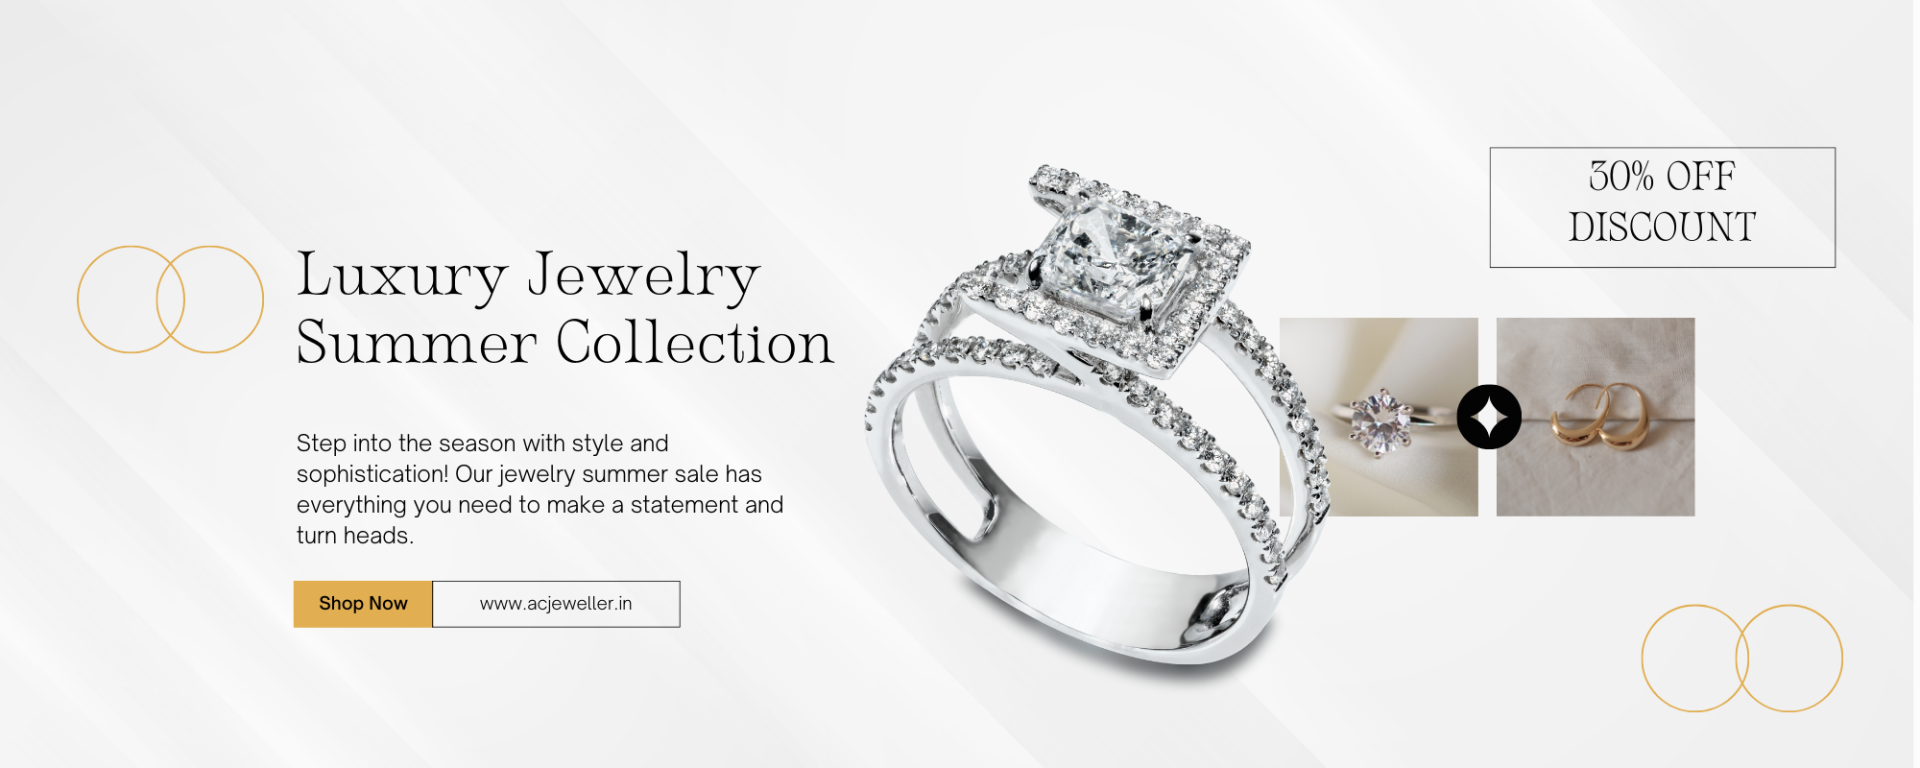 White Gold Elegant Luxury Jewelry Collection Facebook Cover (2000 × 800 px)